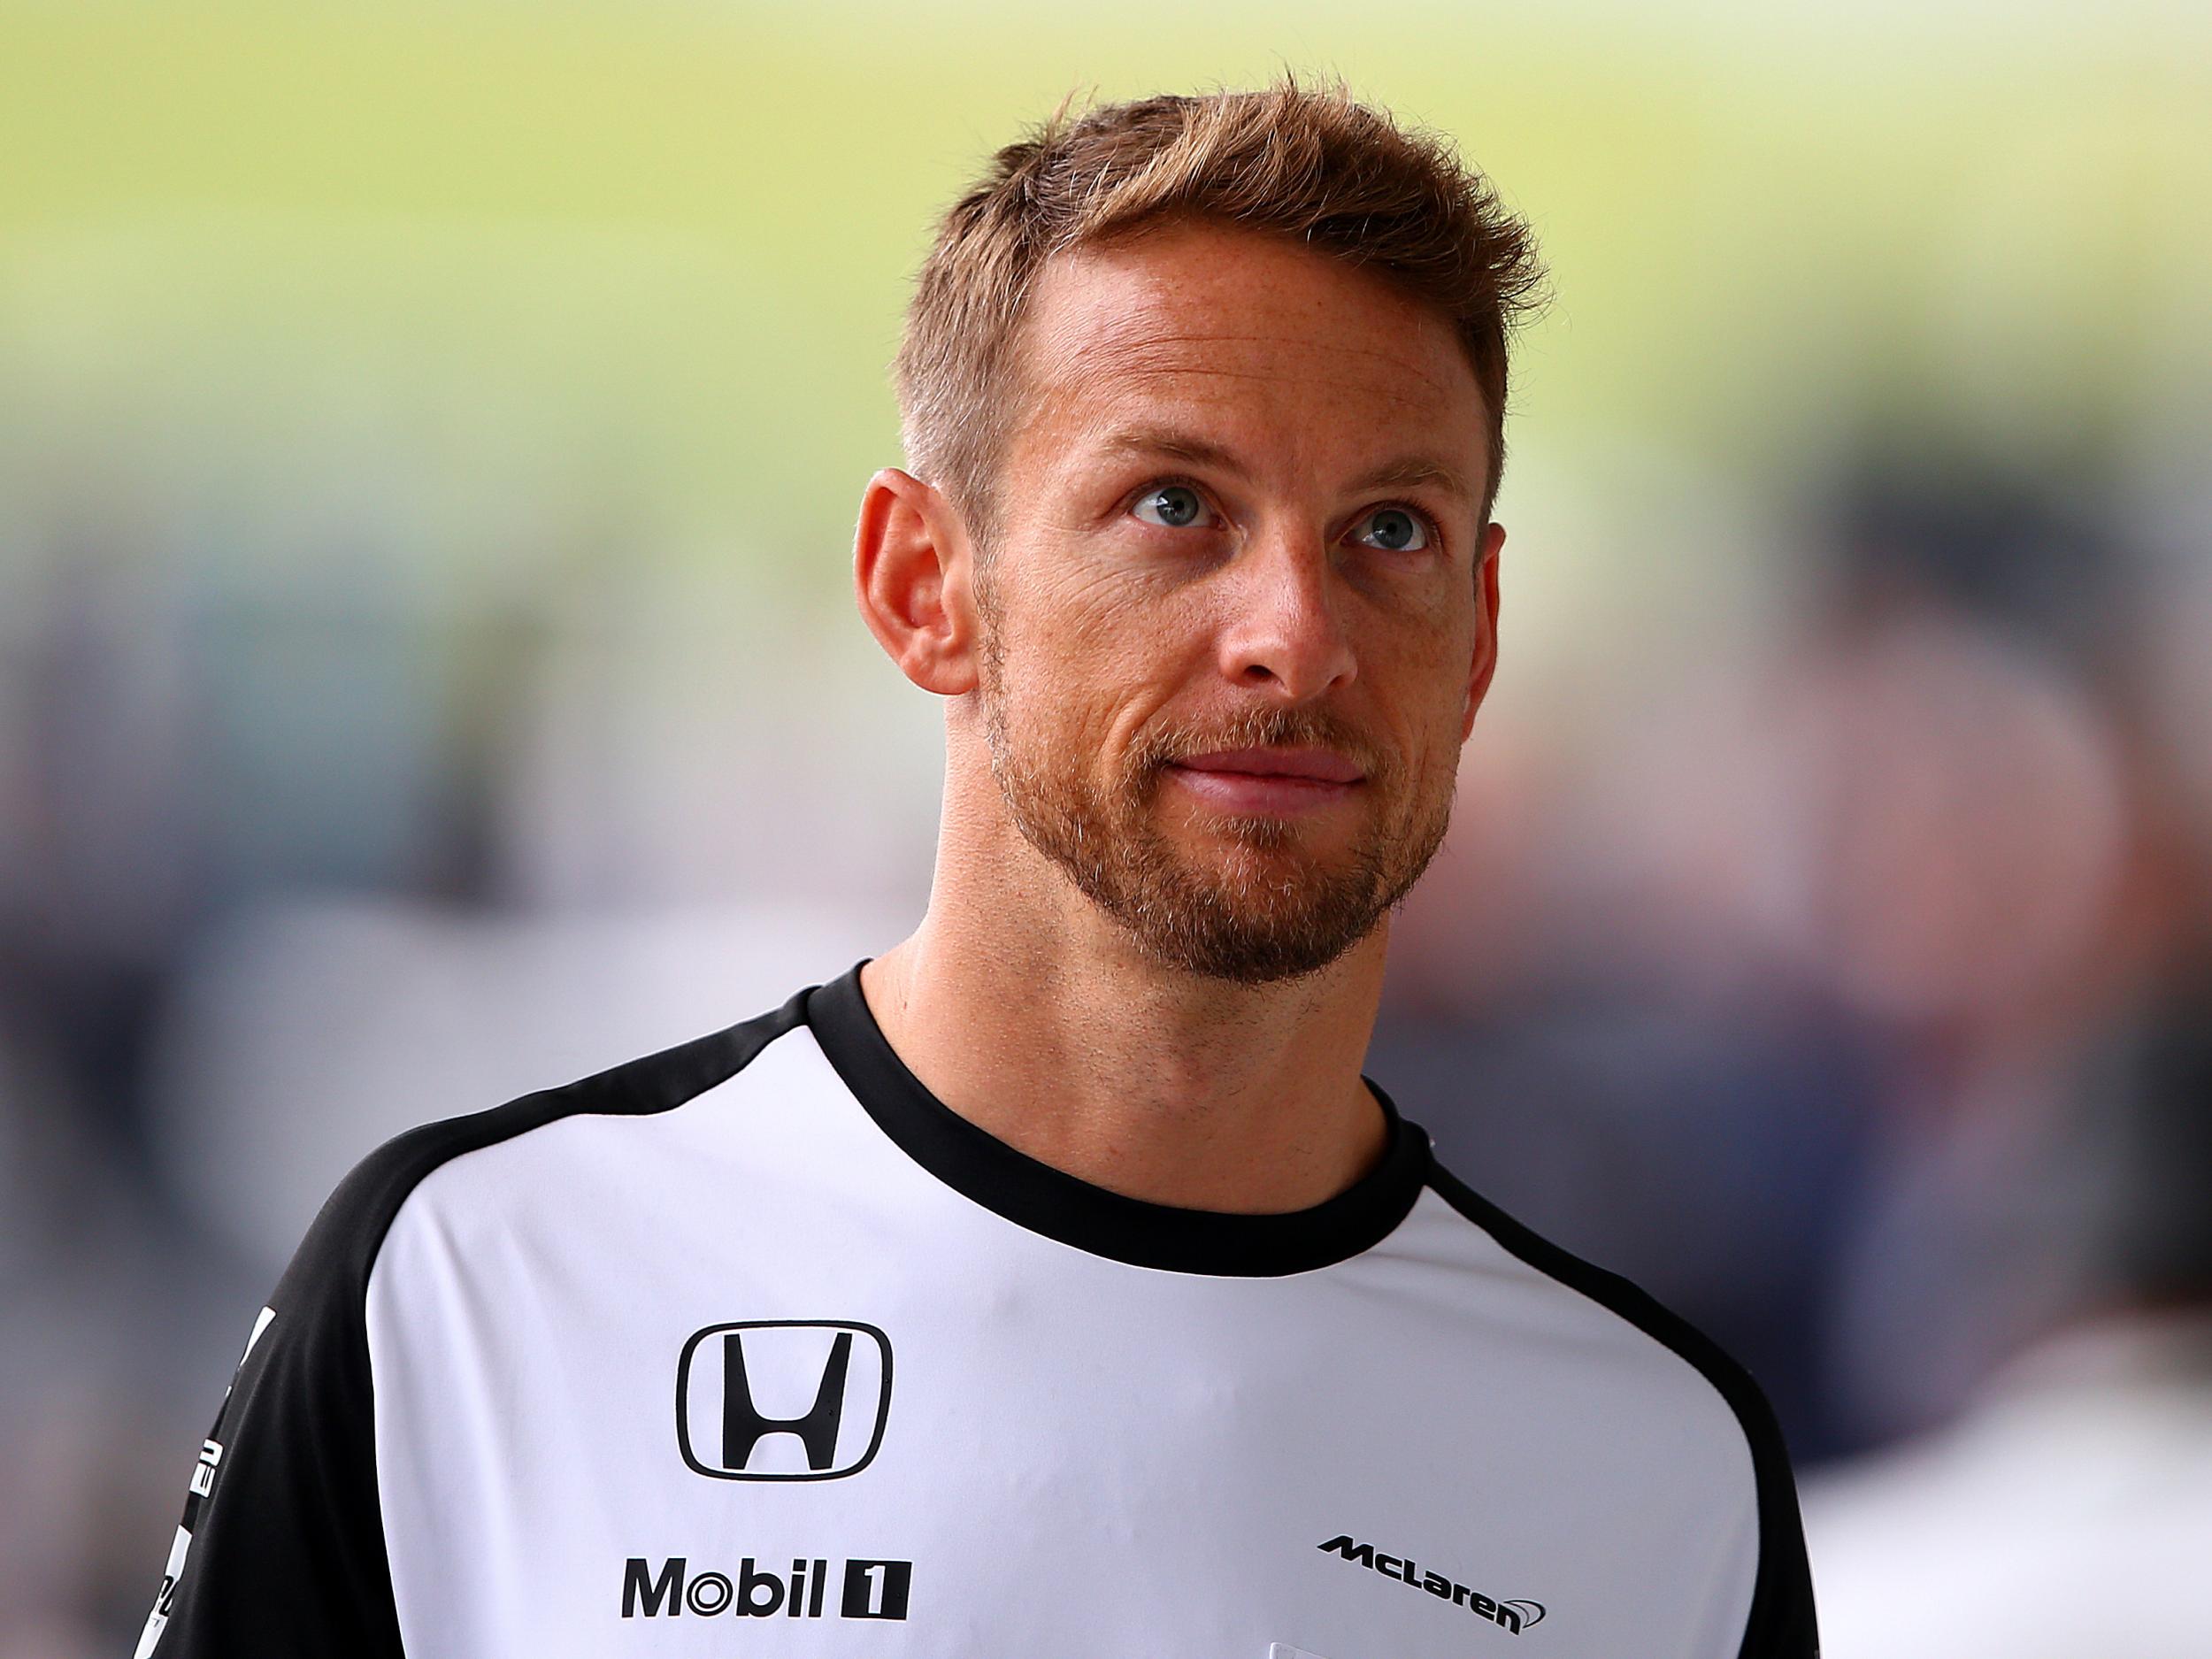 Button is contracted as a reserve driver and ambassador of McLaren until the 2018 season